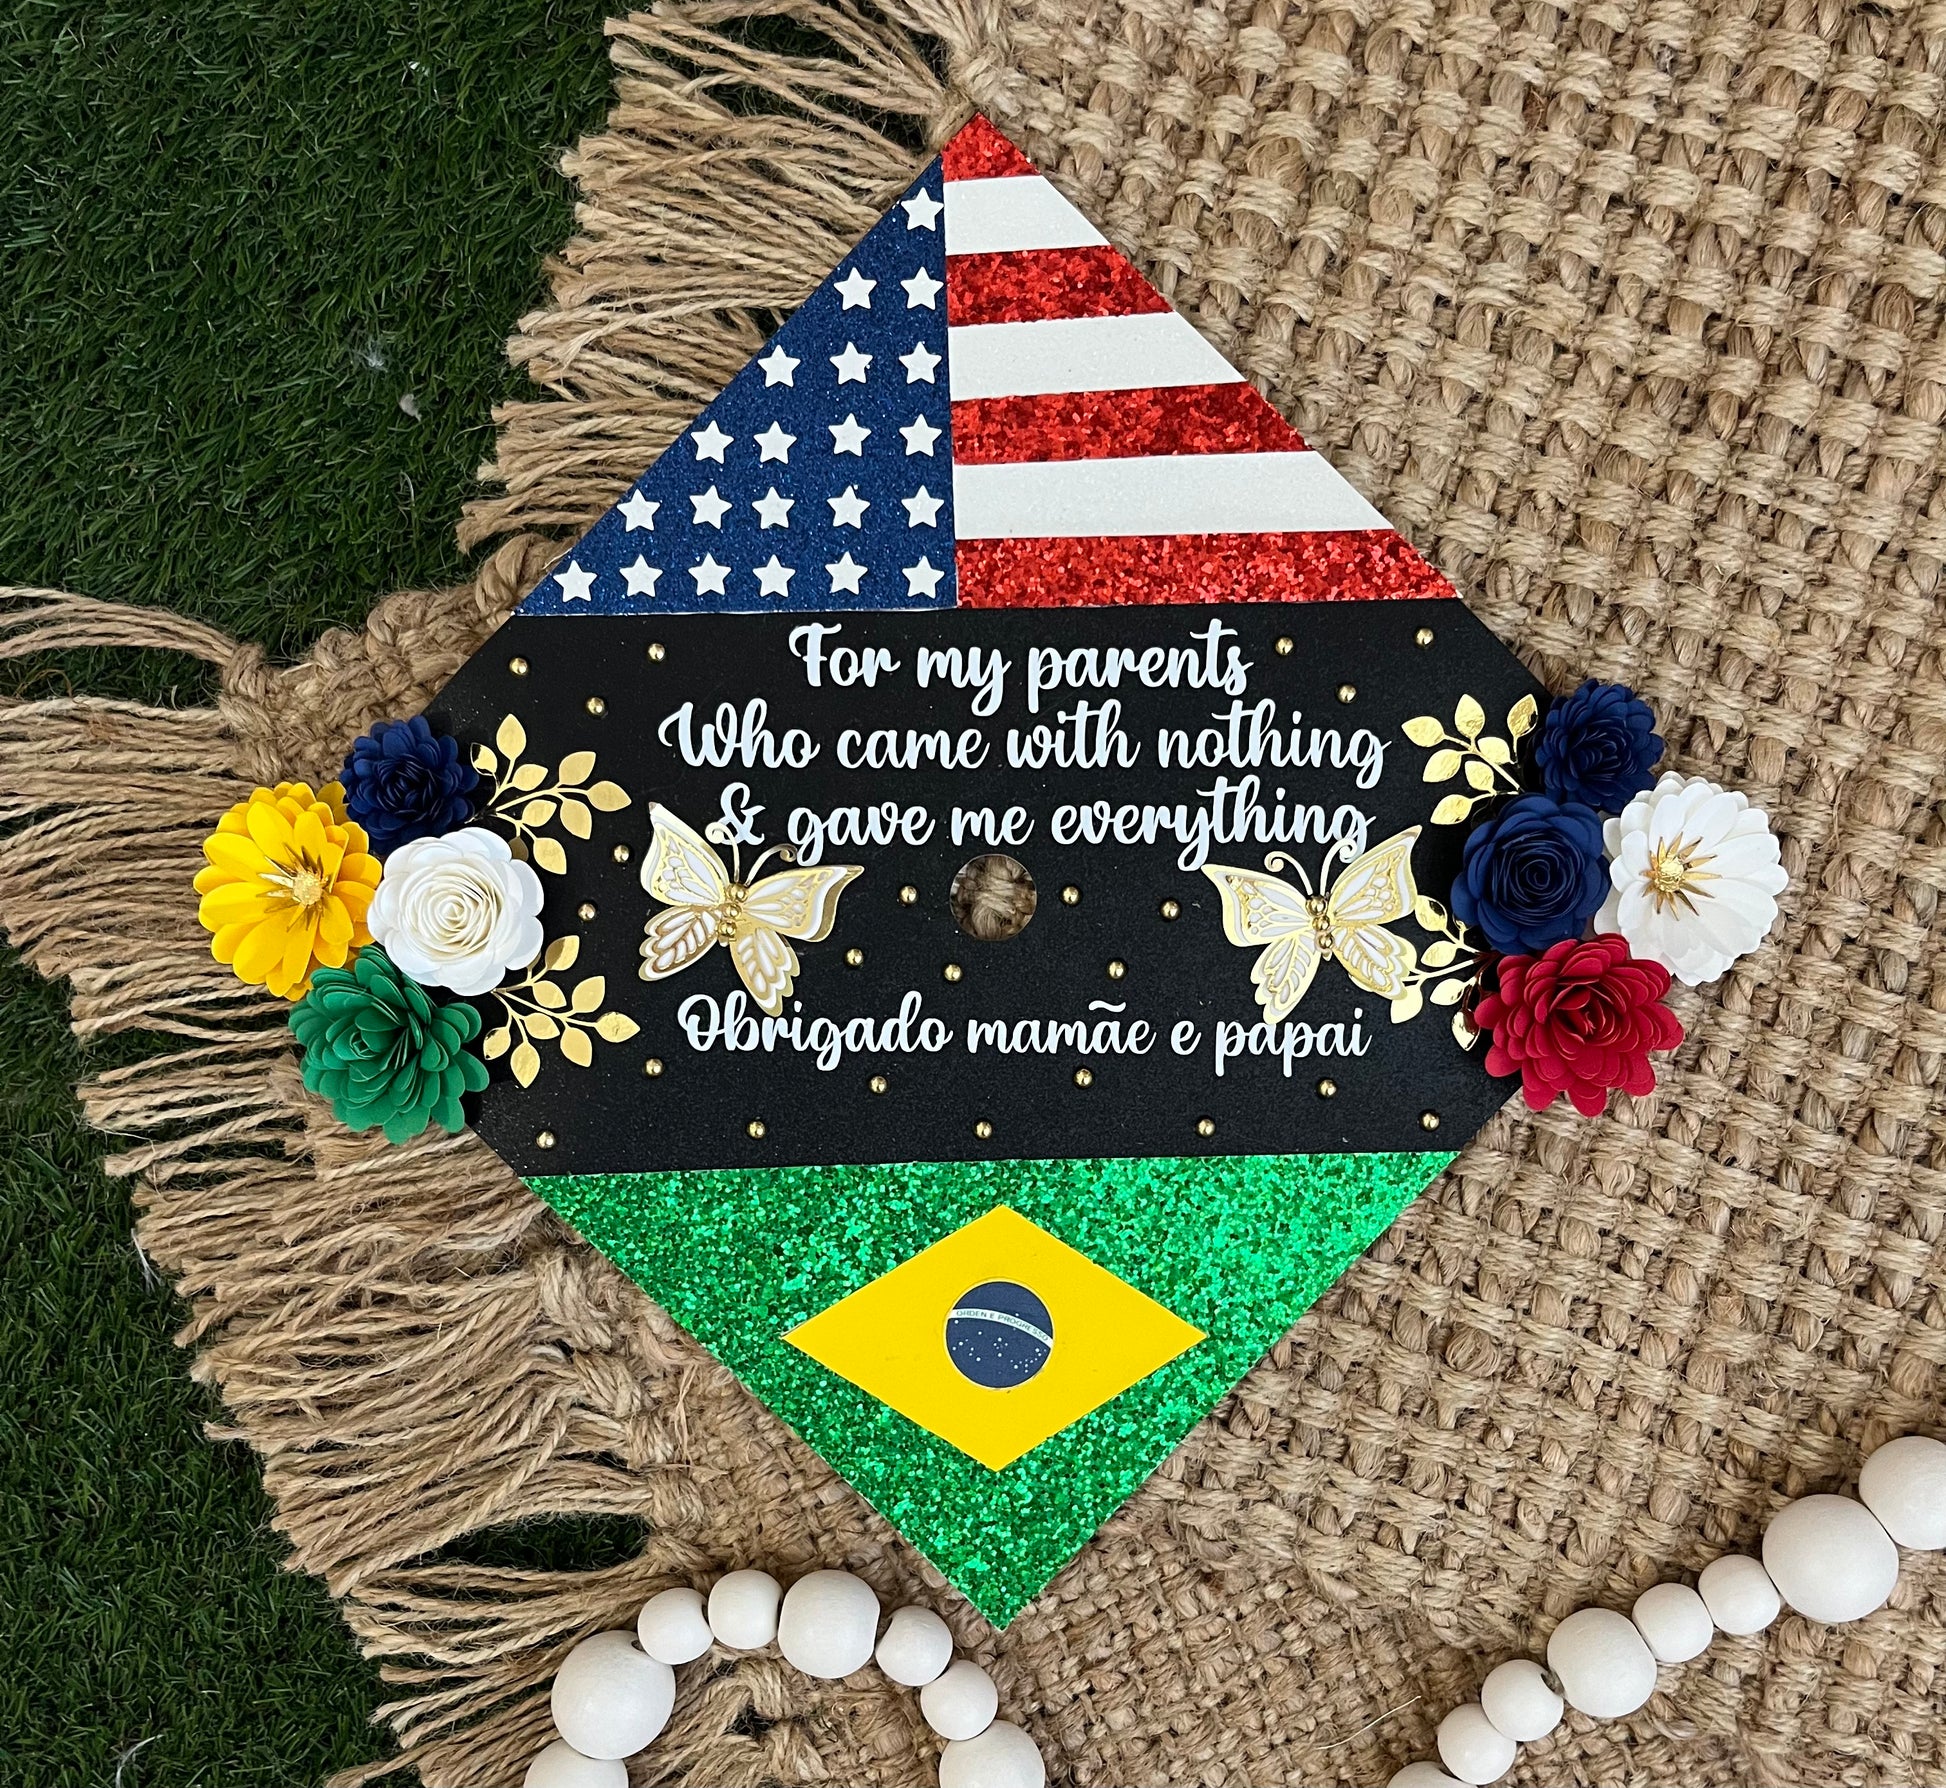 Grad Cap Topper 2 Country flags & Flowers – Cynthia's paper flowers